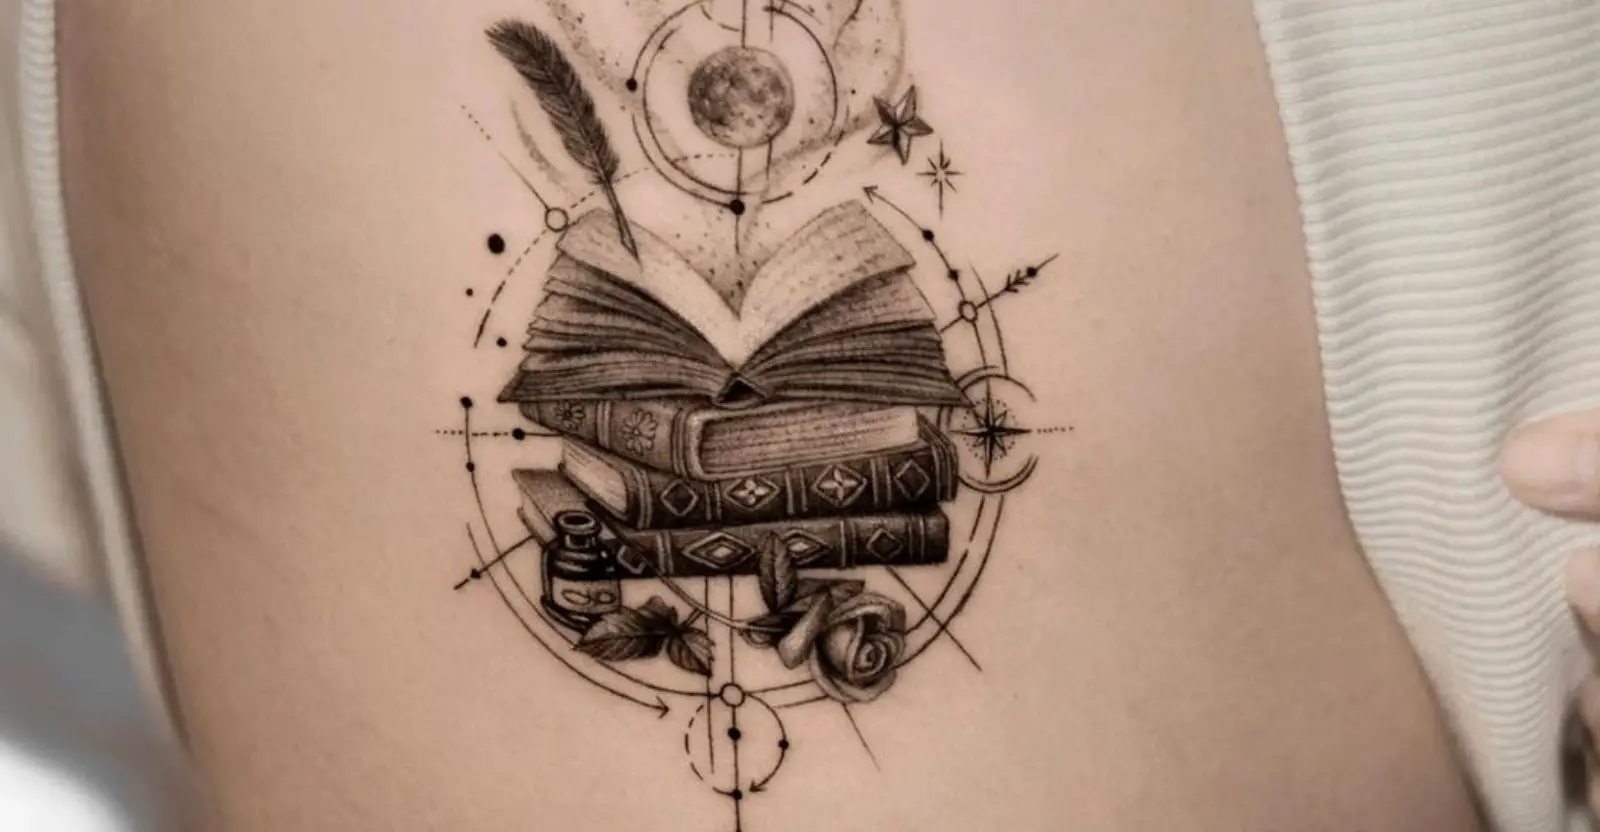 Swoon Worthy Literary Tattoos! – Touch My Spine Book Reviews